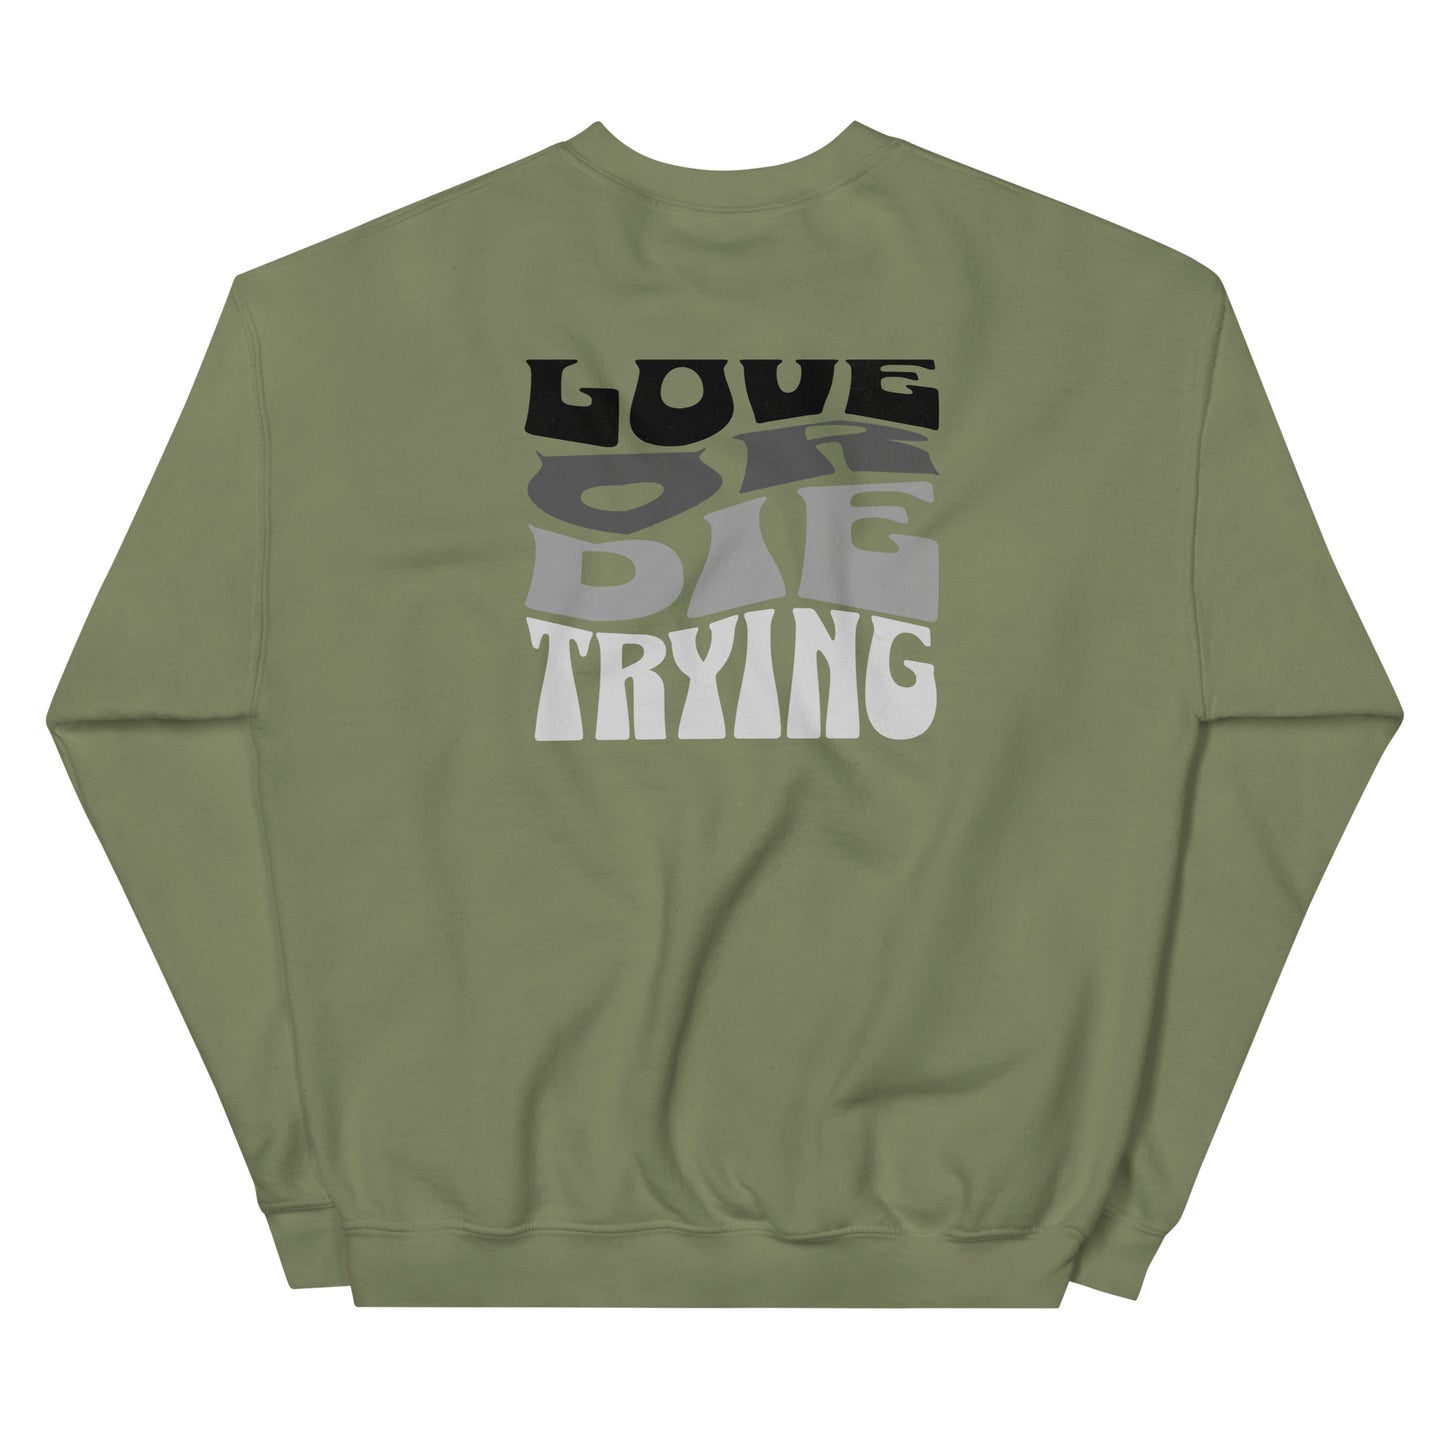 Love or Die Trying Sweater